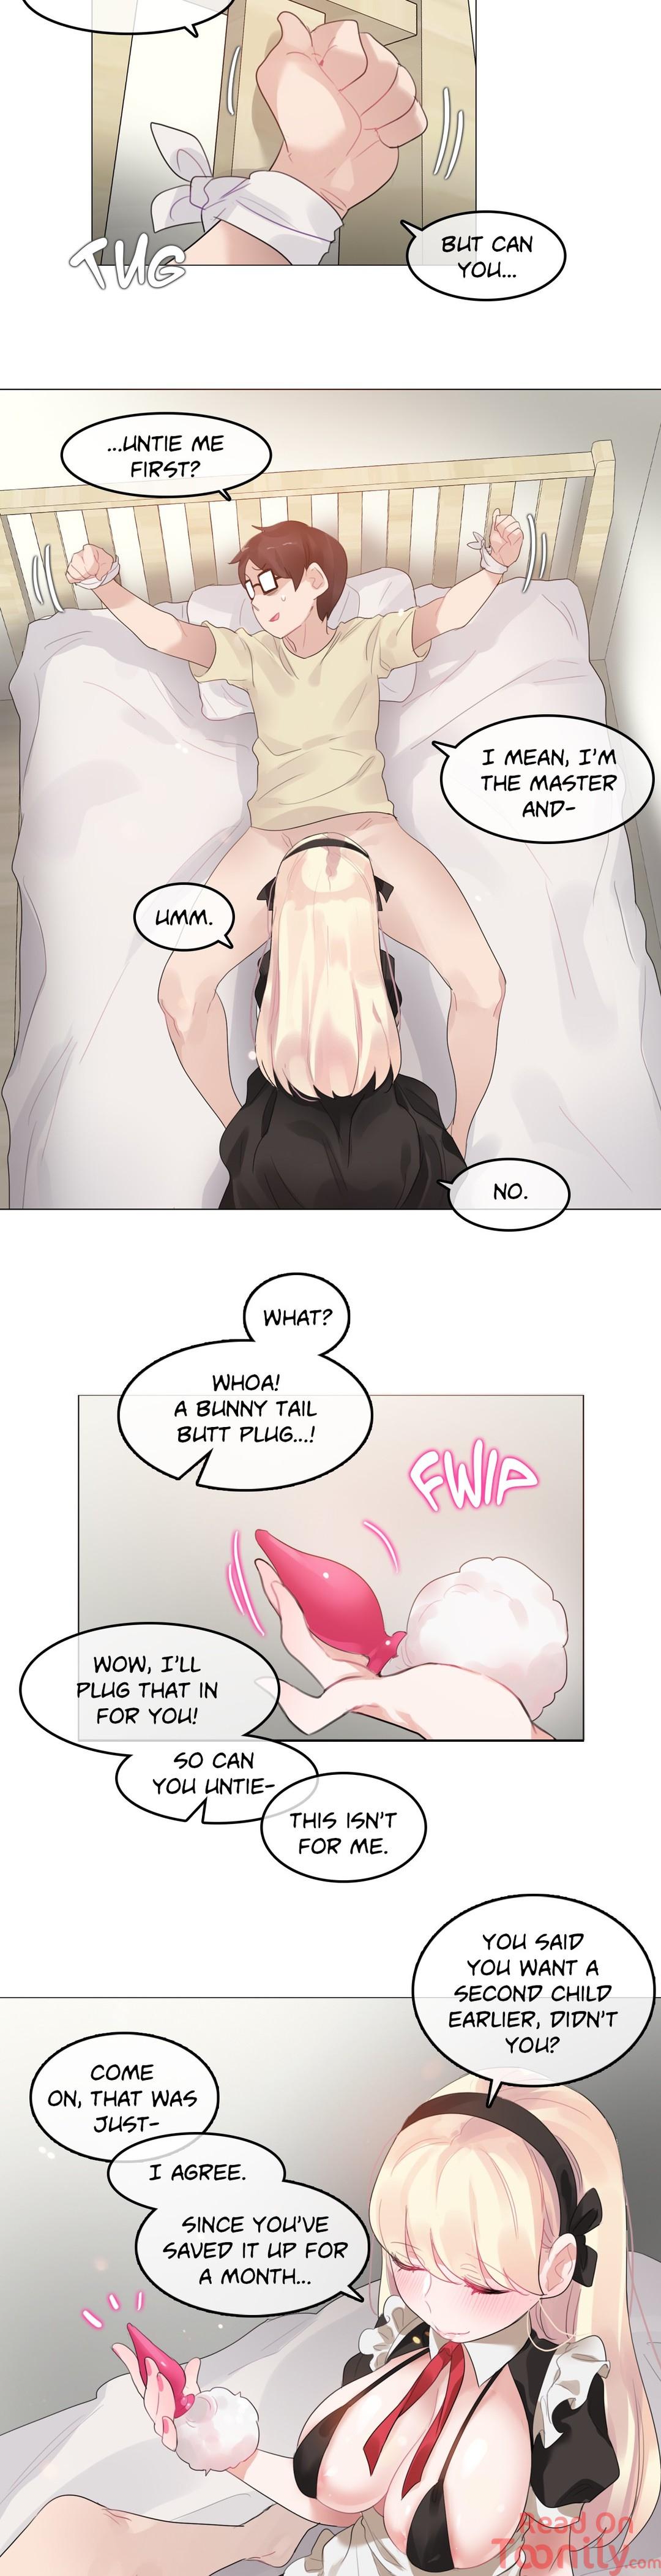 A Pervert's Daily Life • Chapter 66-70 89